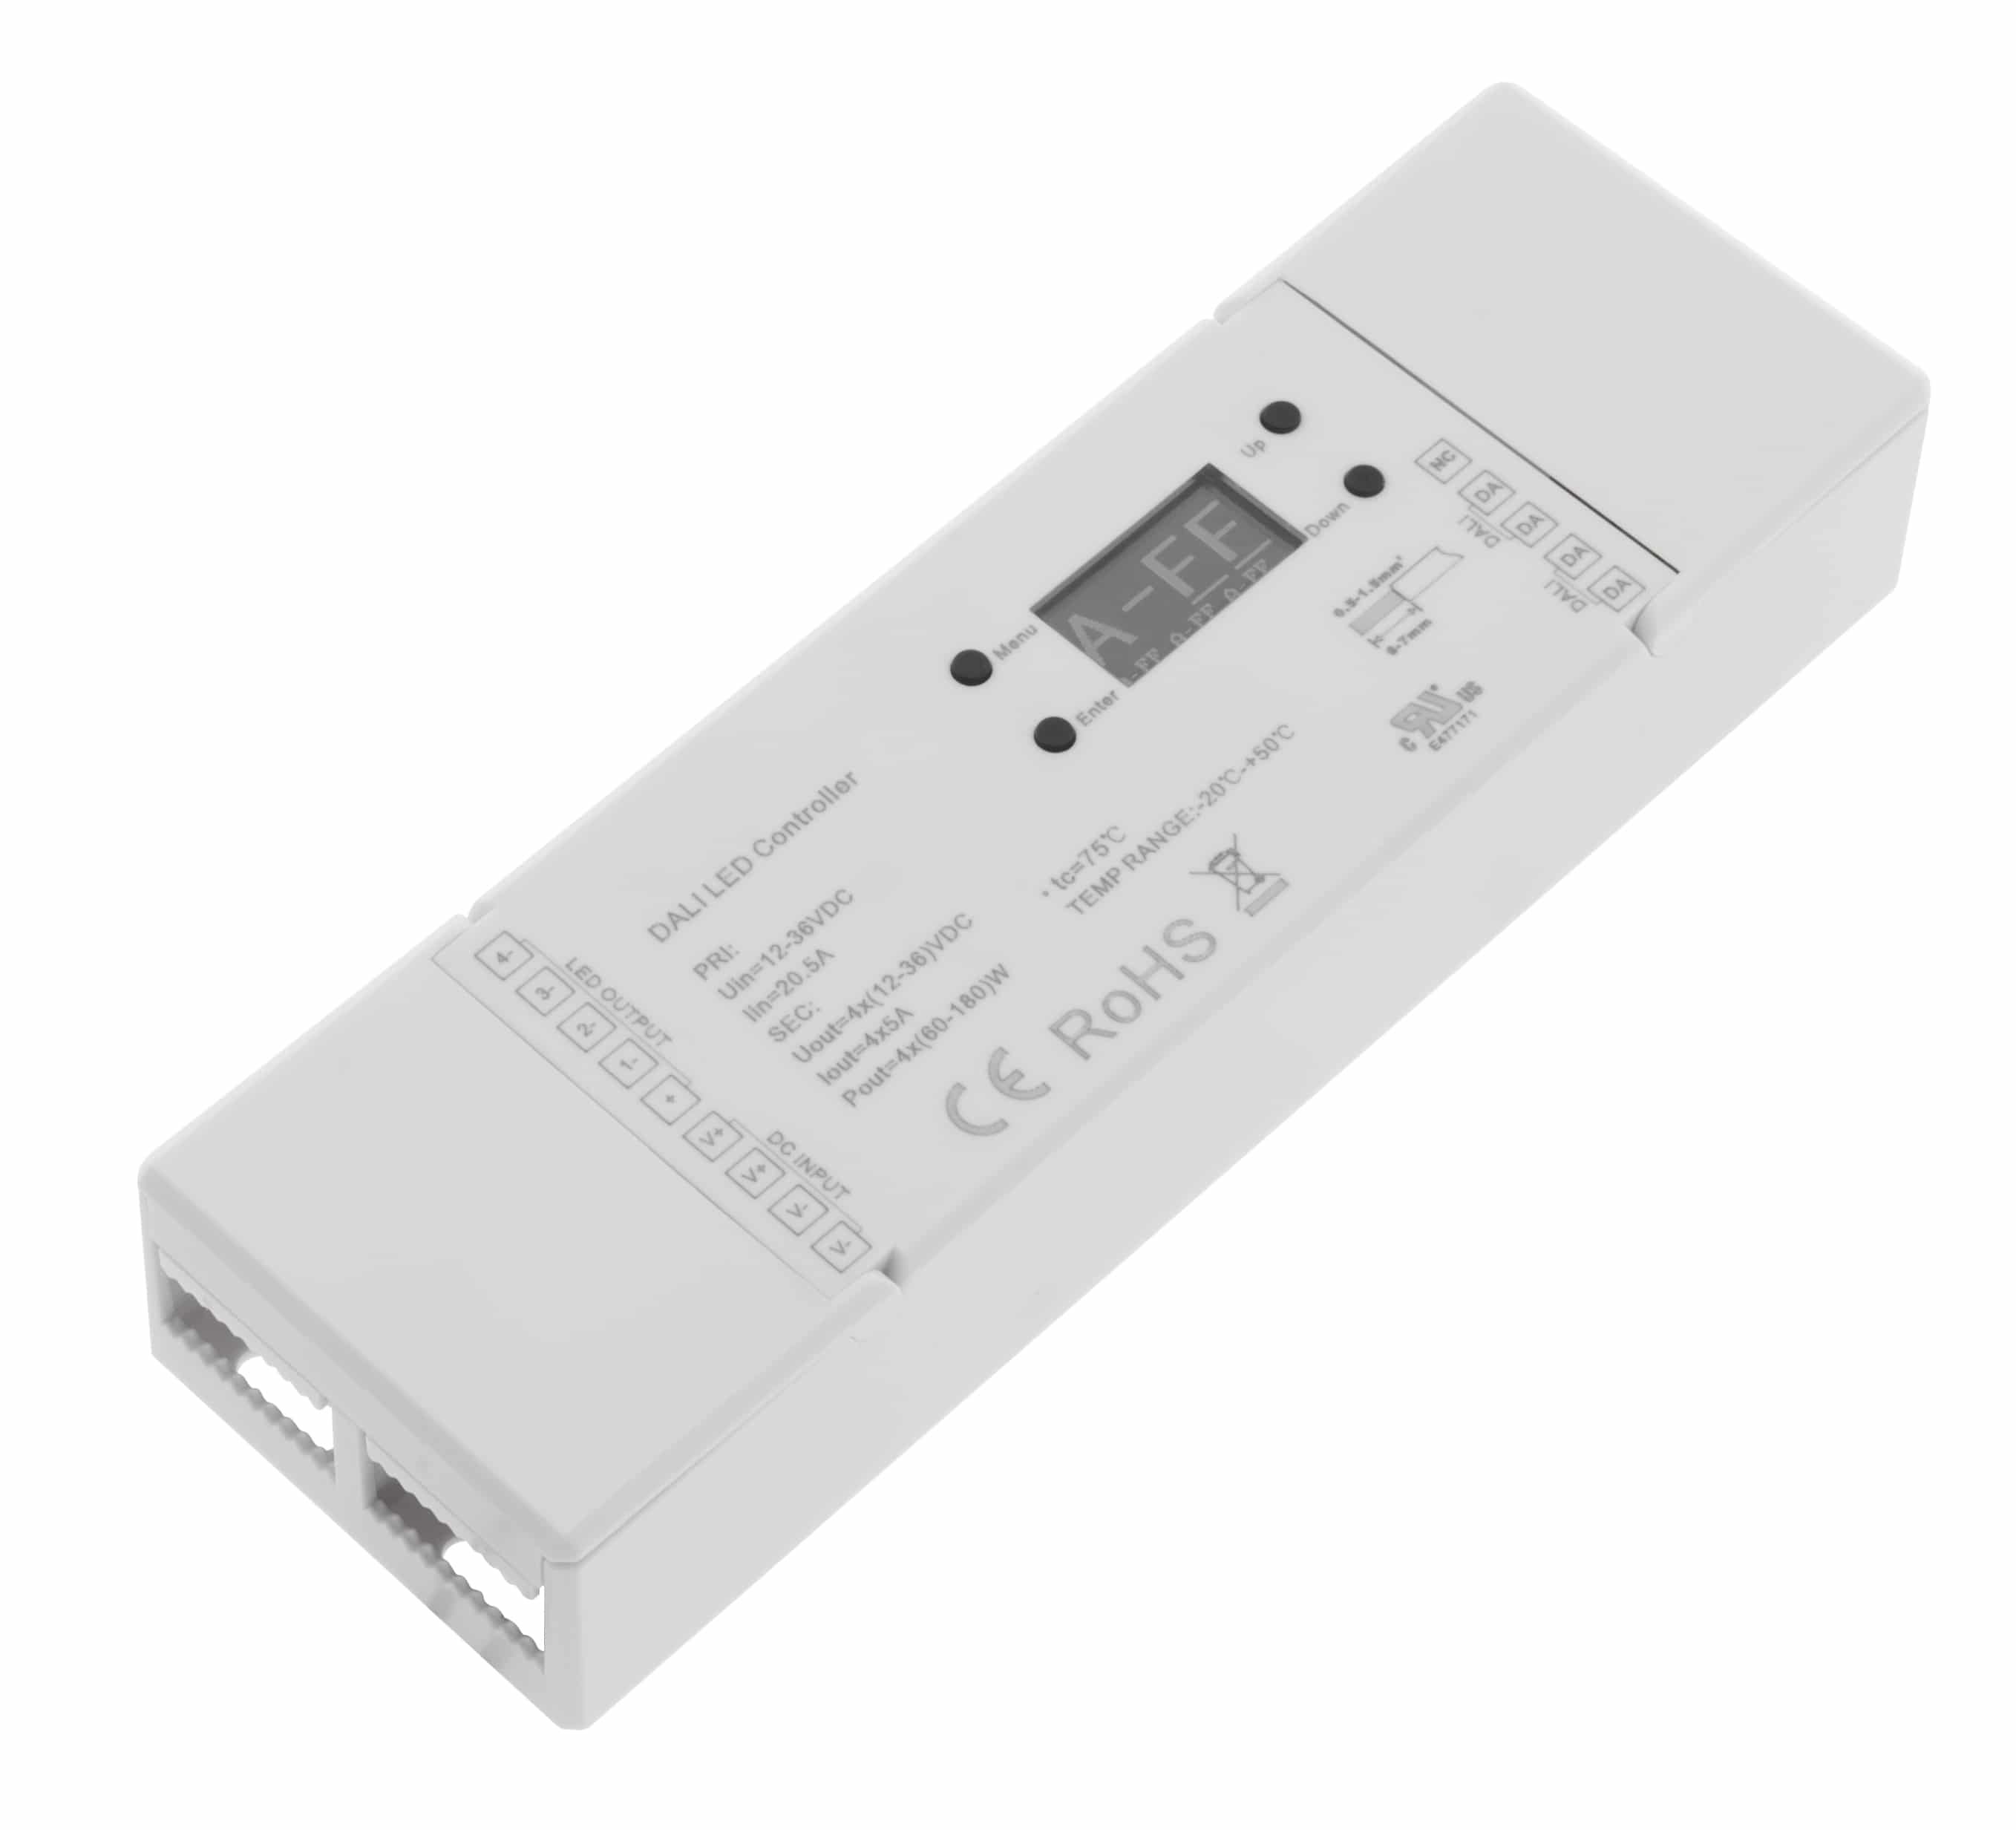 LED DALI PWM Dimmer 1-4 Channel - DT6 with OLED Display